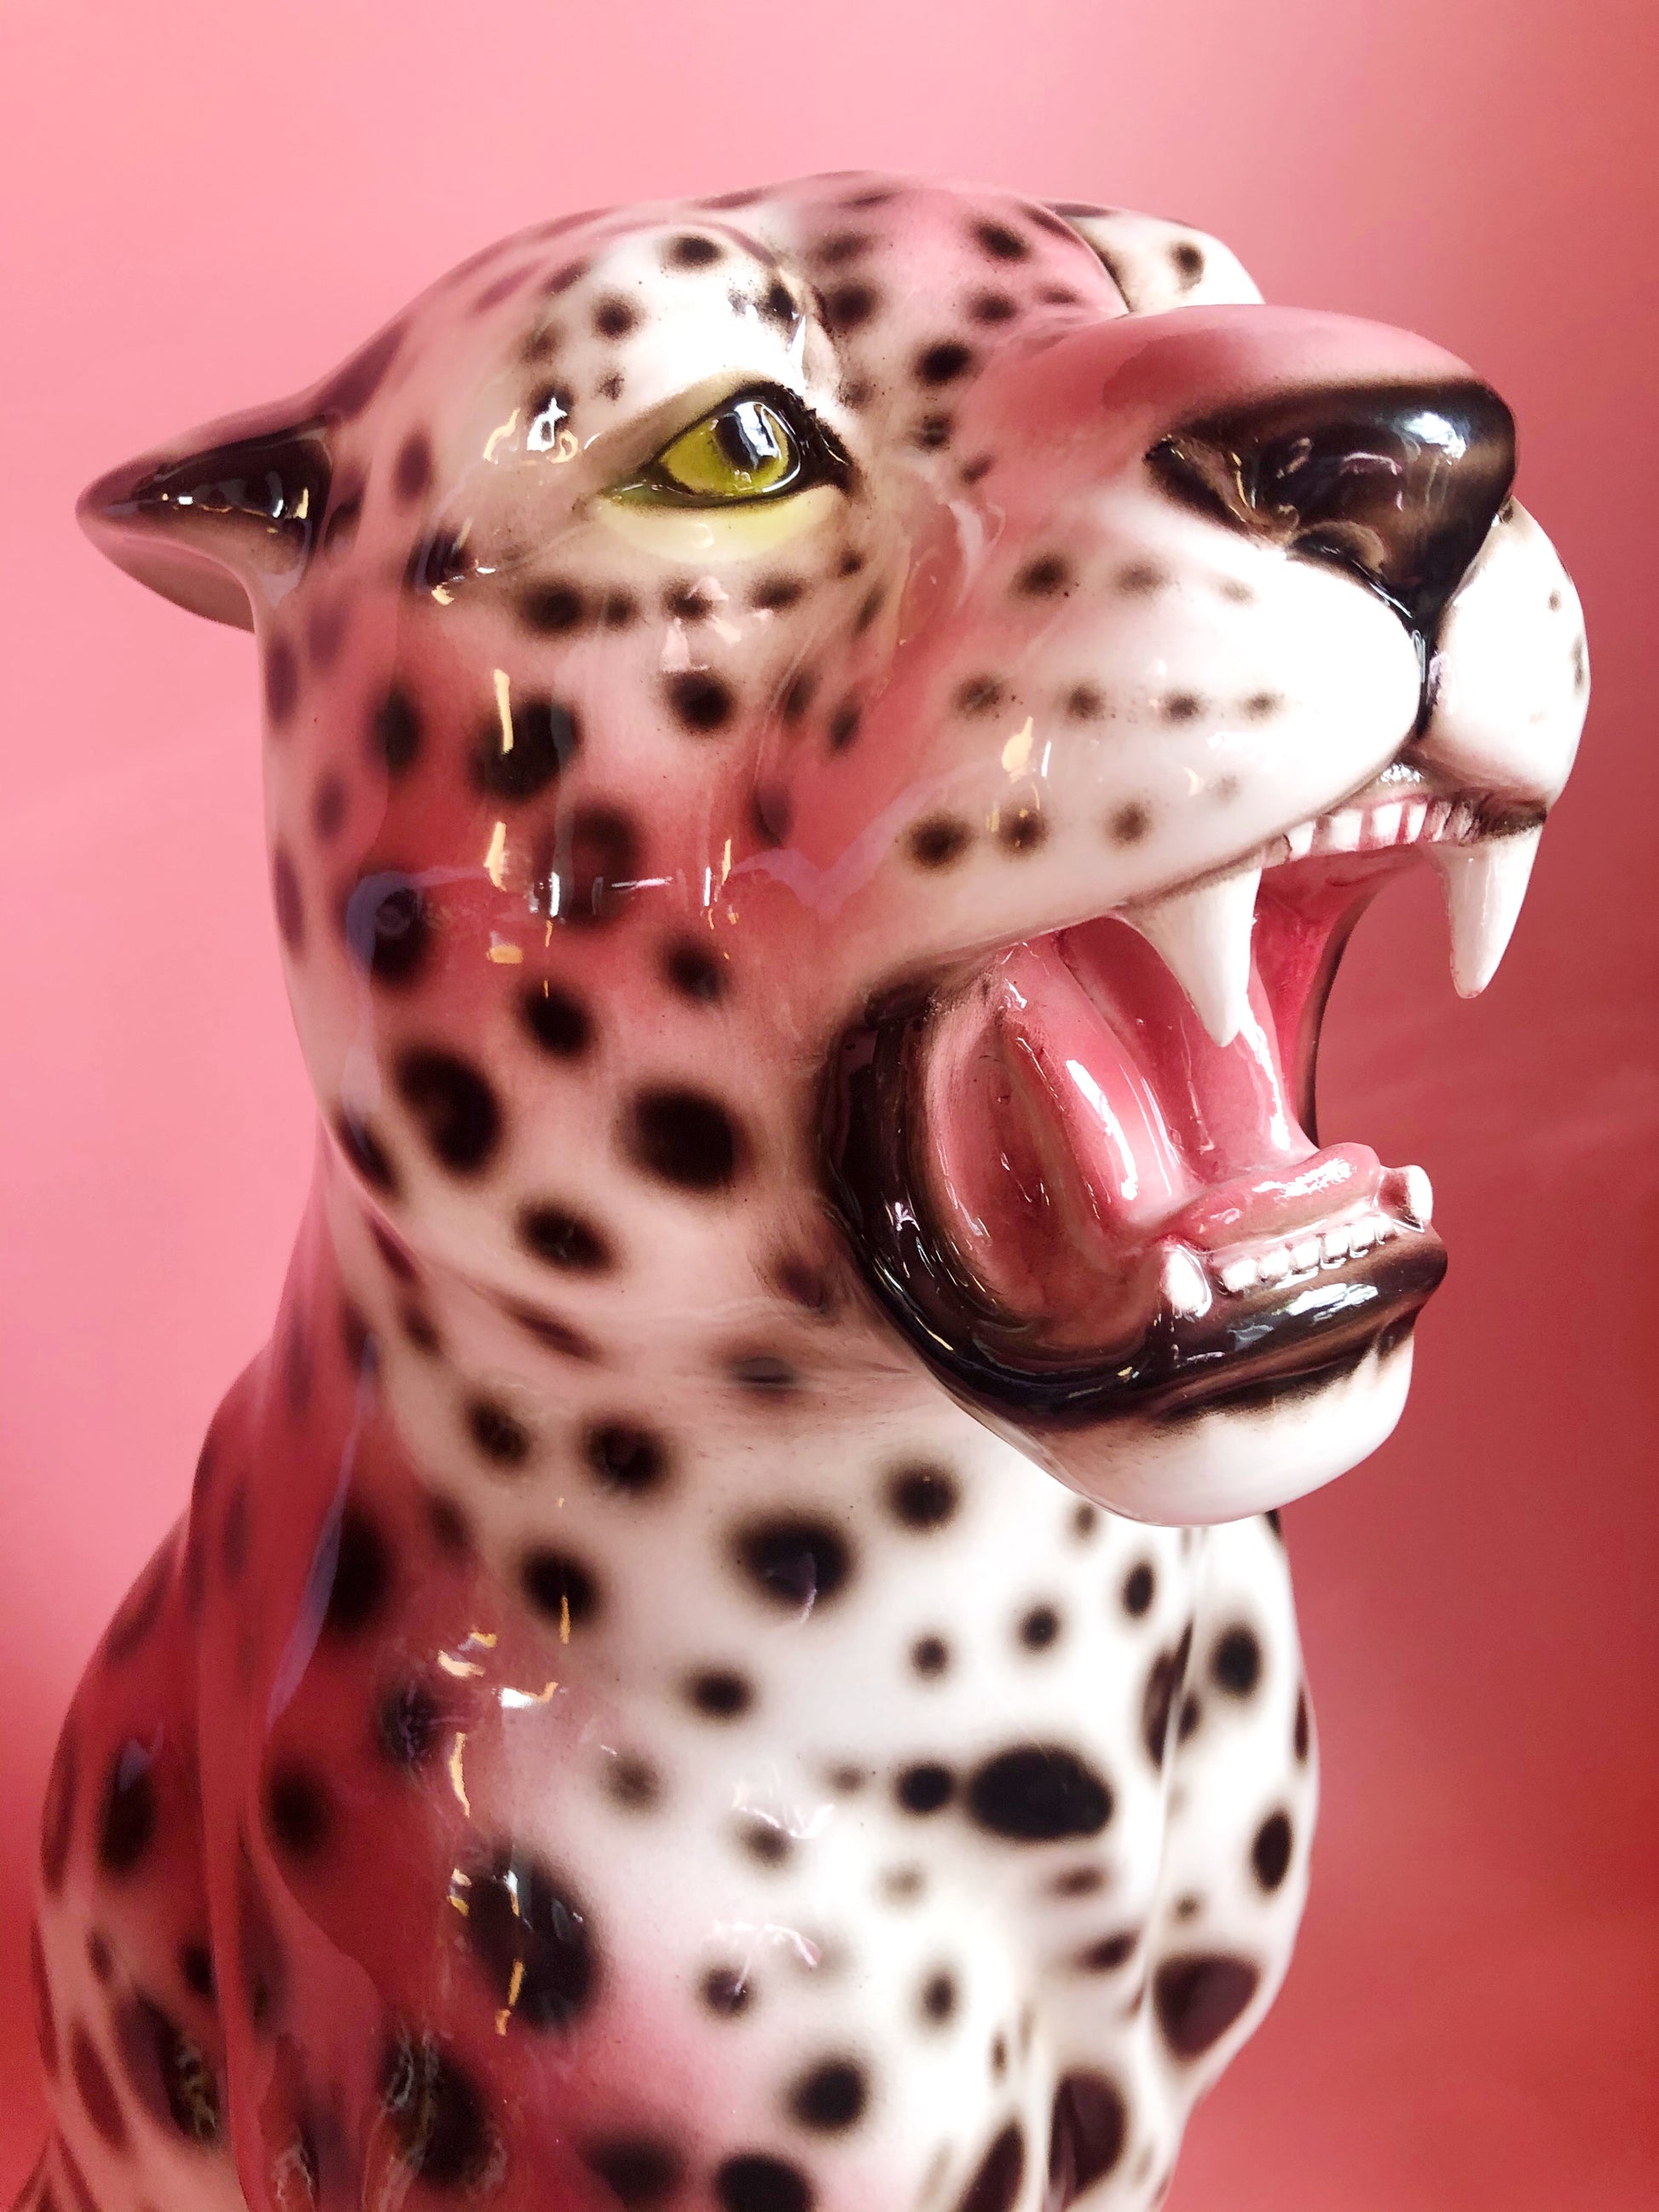 A large pink ceramic leopard statue made in Italy - Belle and